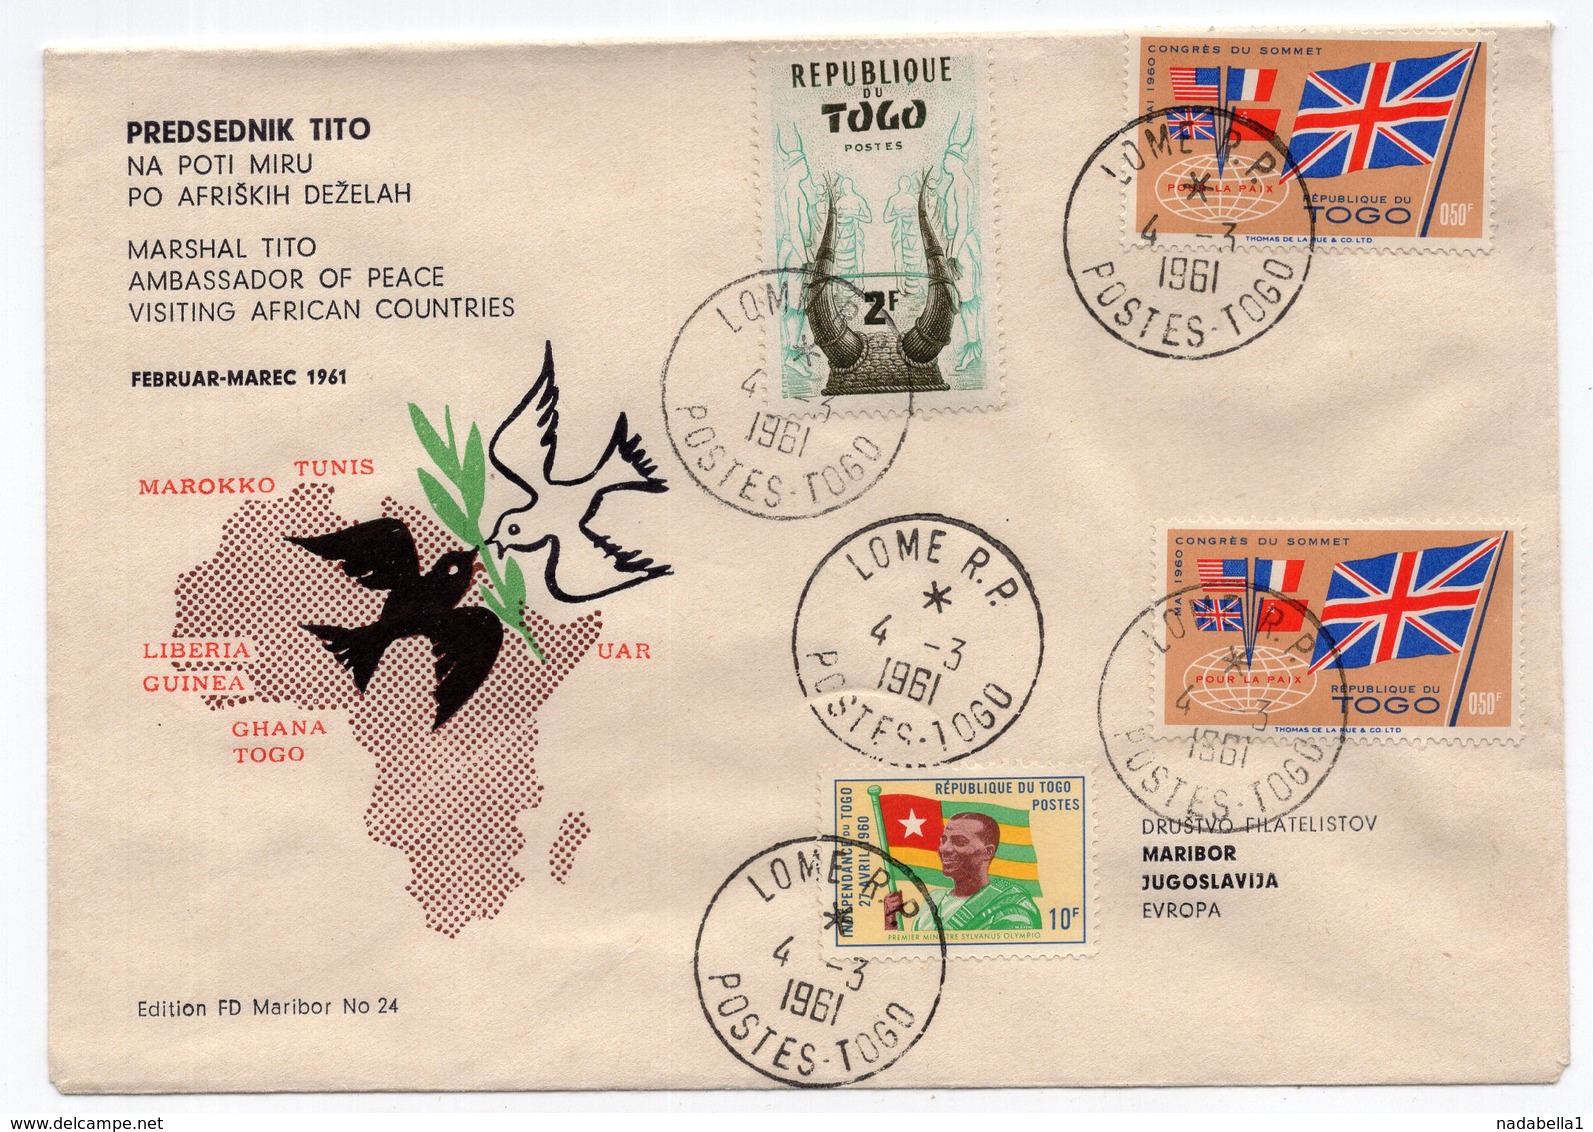 1961 YUGOSLAVIA, SPECIAL COVER, TITO IN AFRICA, TOGO, LOME - Covers & Documents